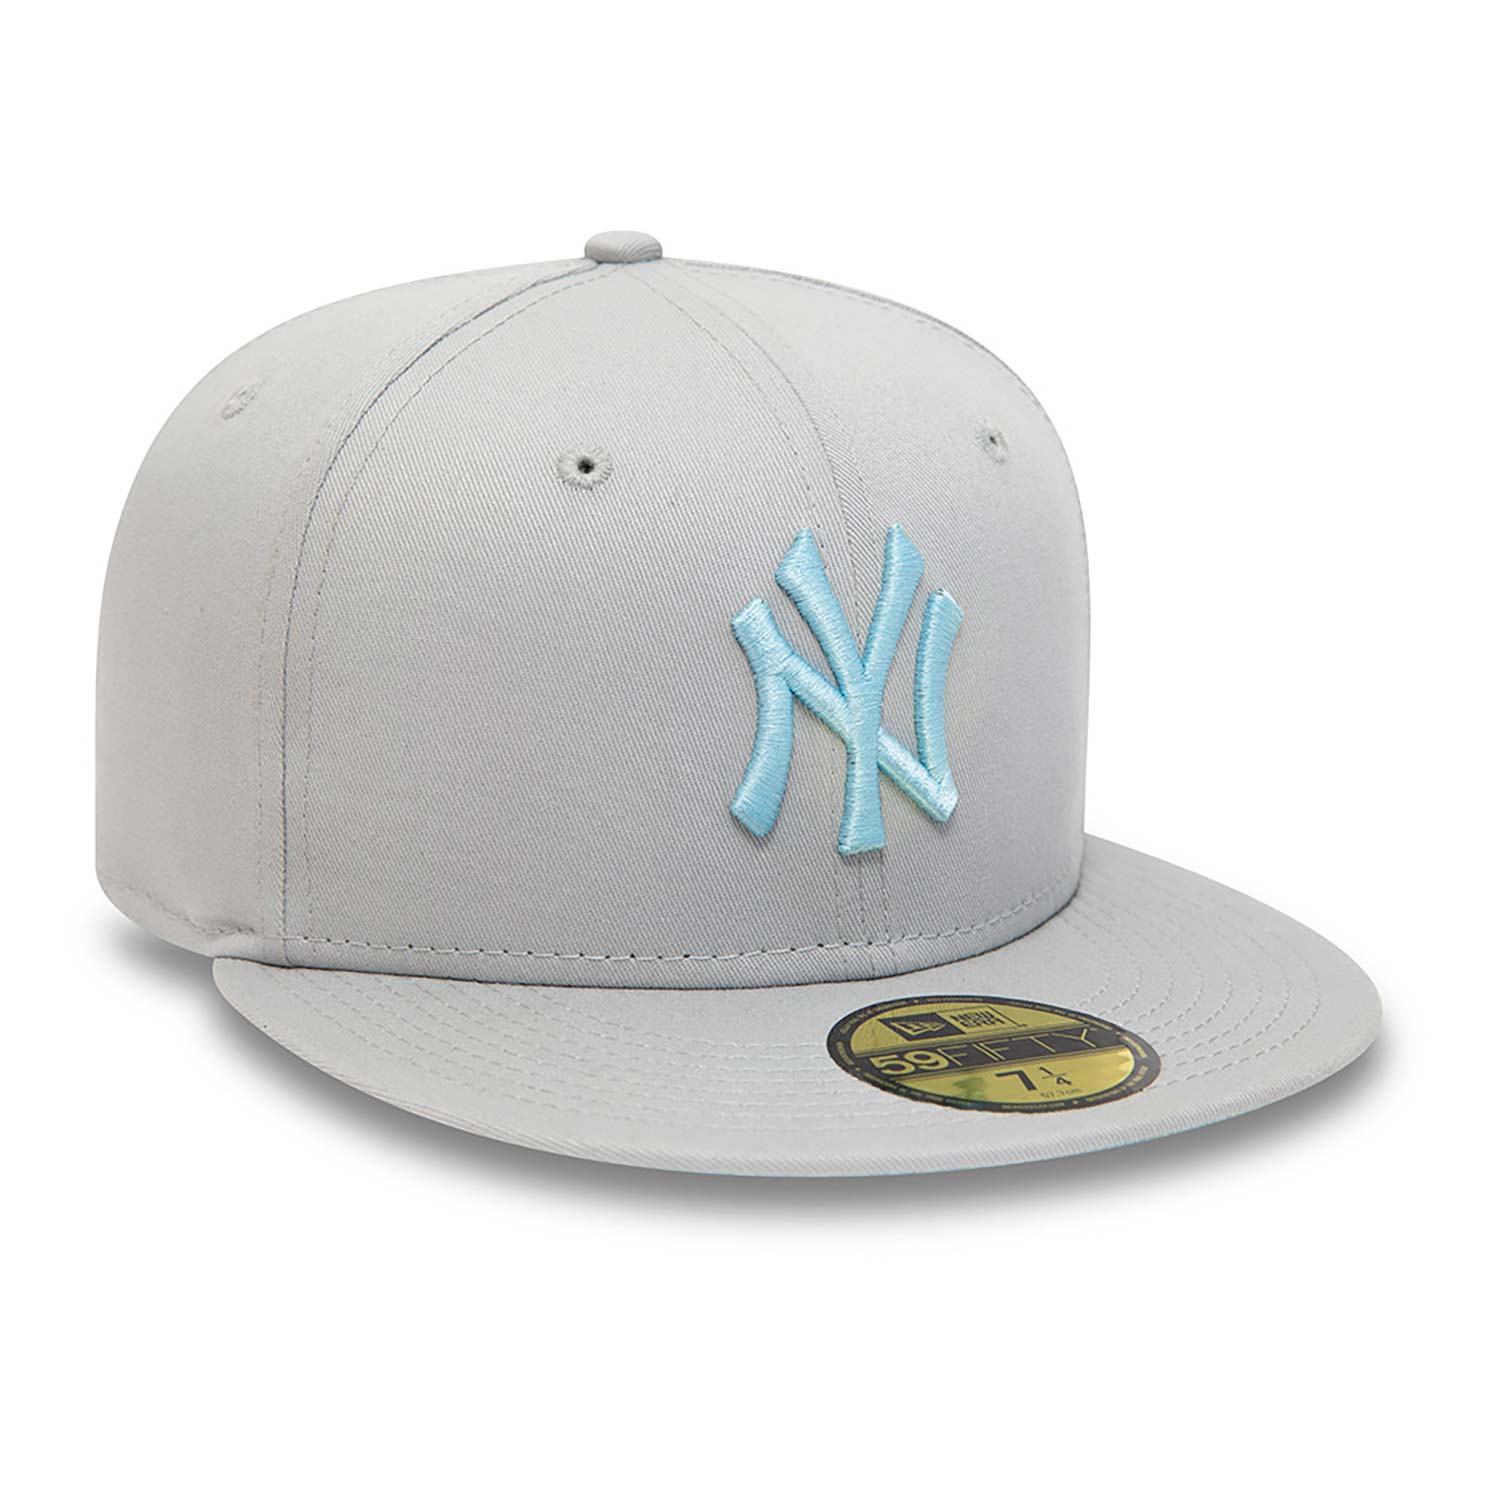 Official New Era League Essential New York Yankees 59FIFTY Fitted Cap ...